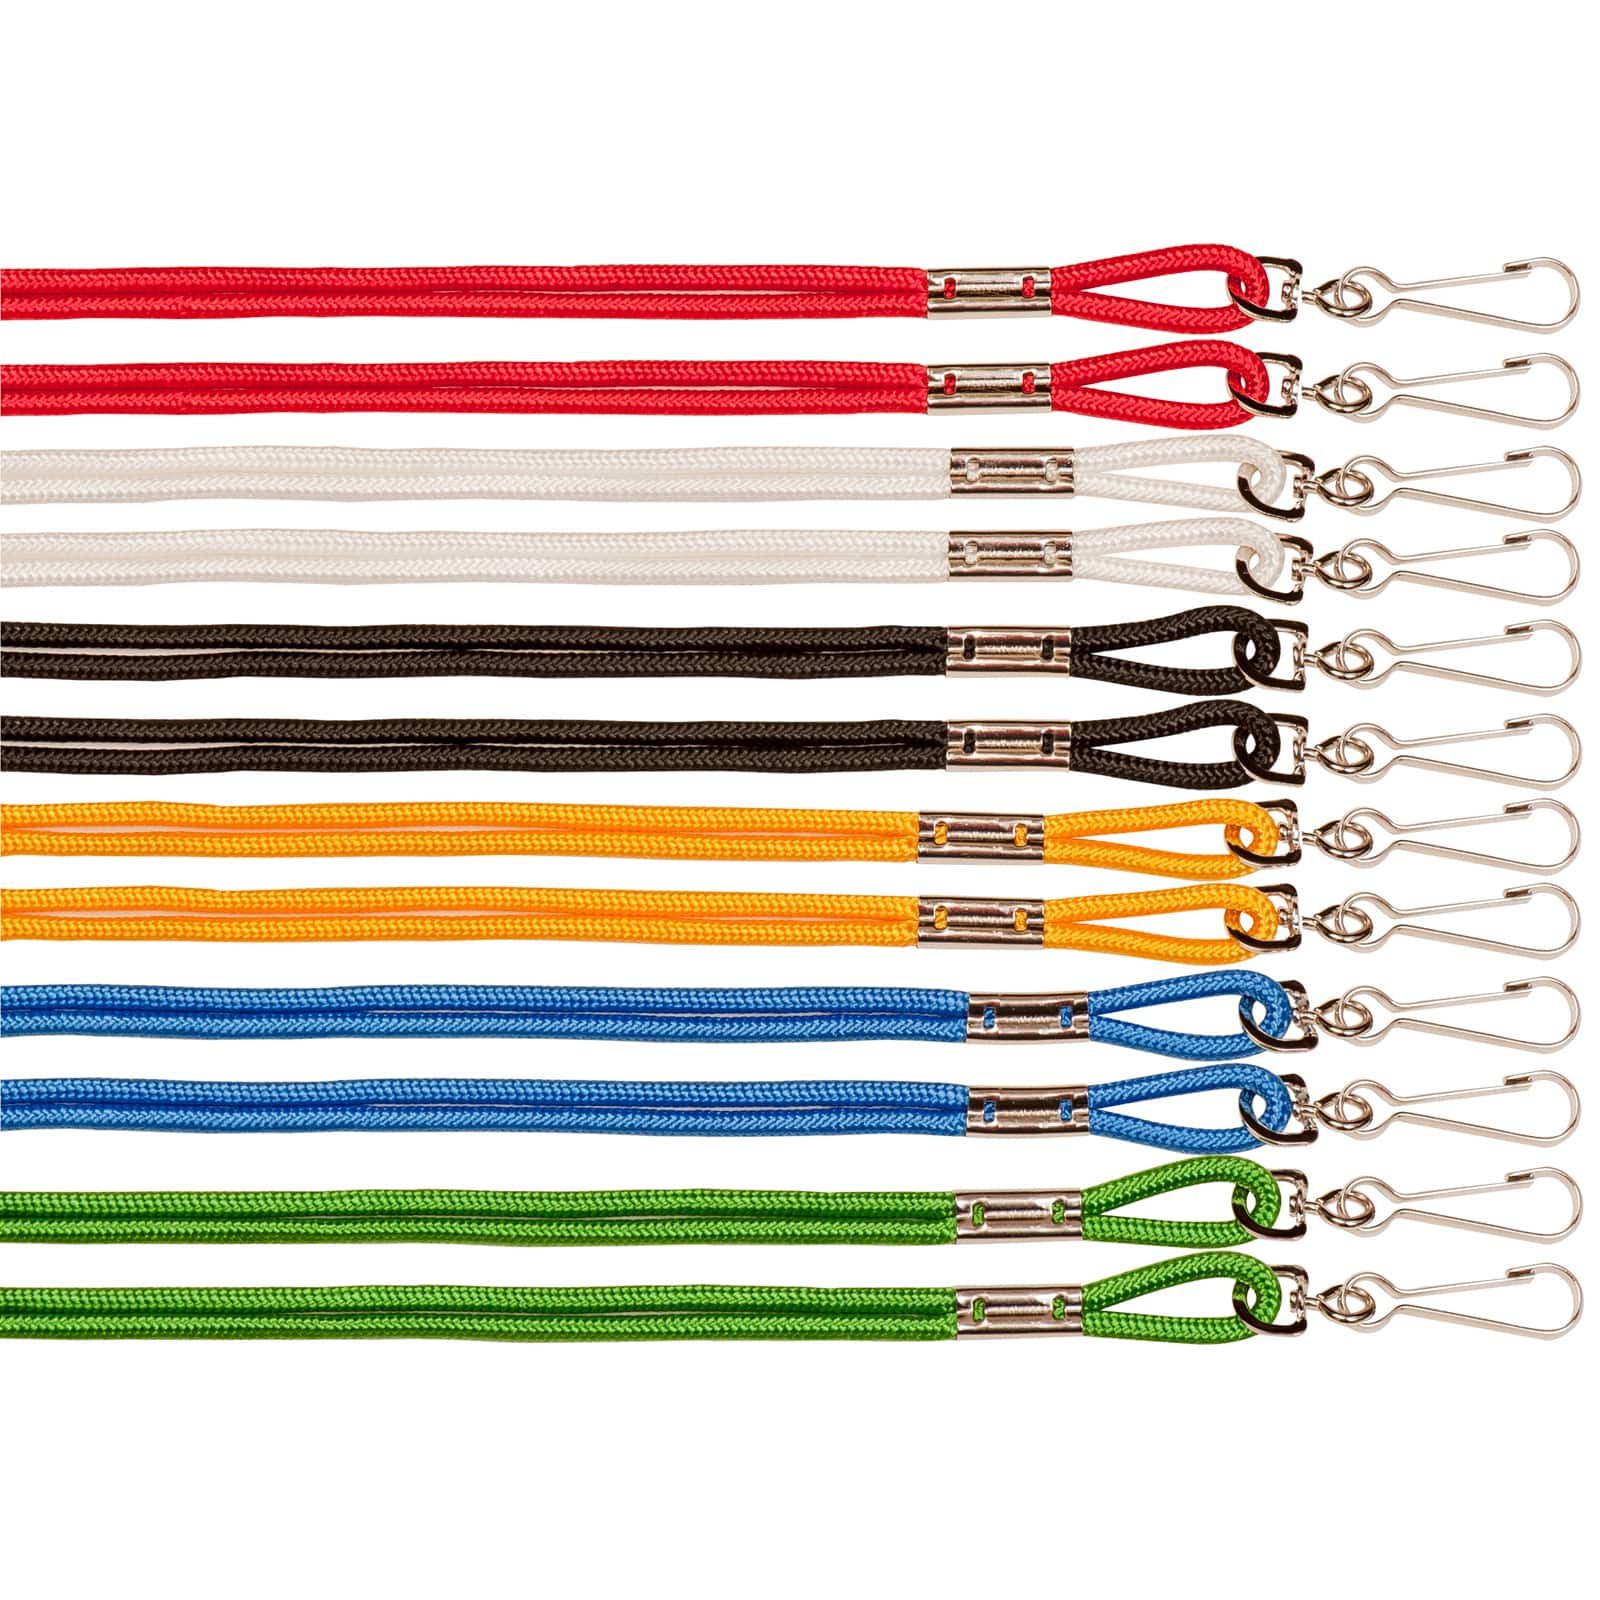 Champion Sports Heavy Nylon Lanyard Assorted Colors, 12 Per Pack - 3 Packs